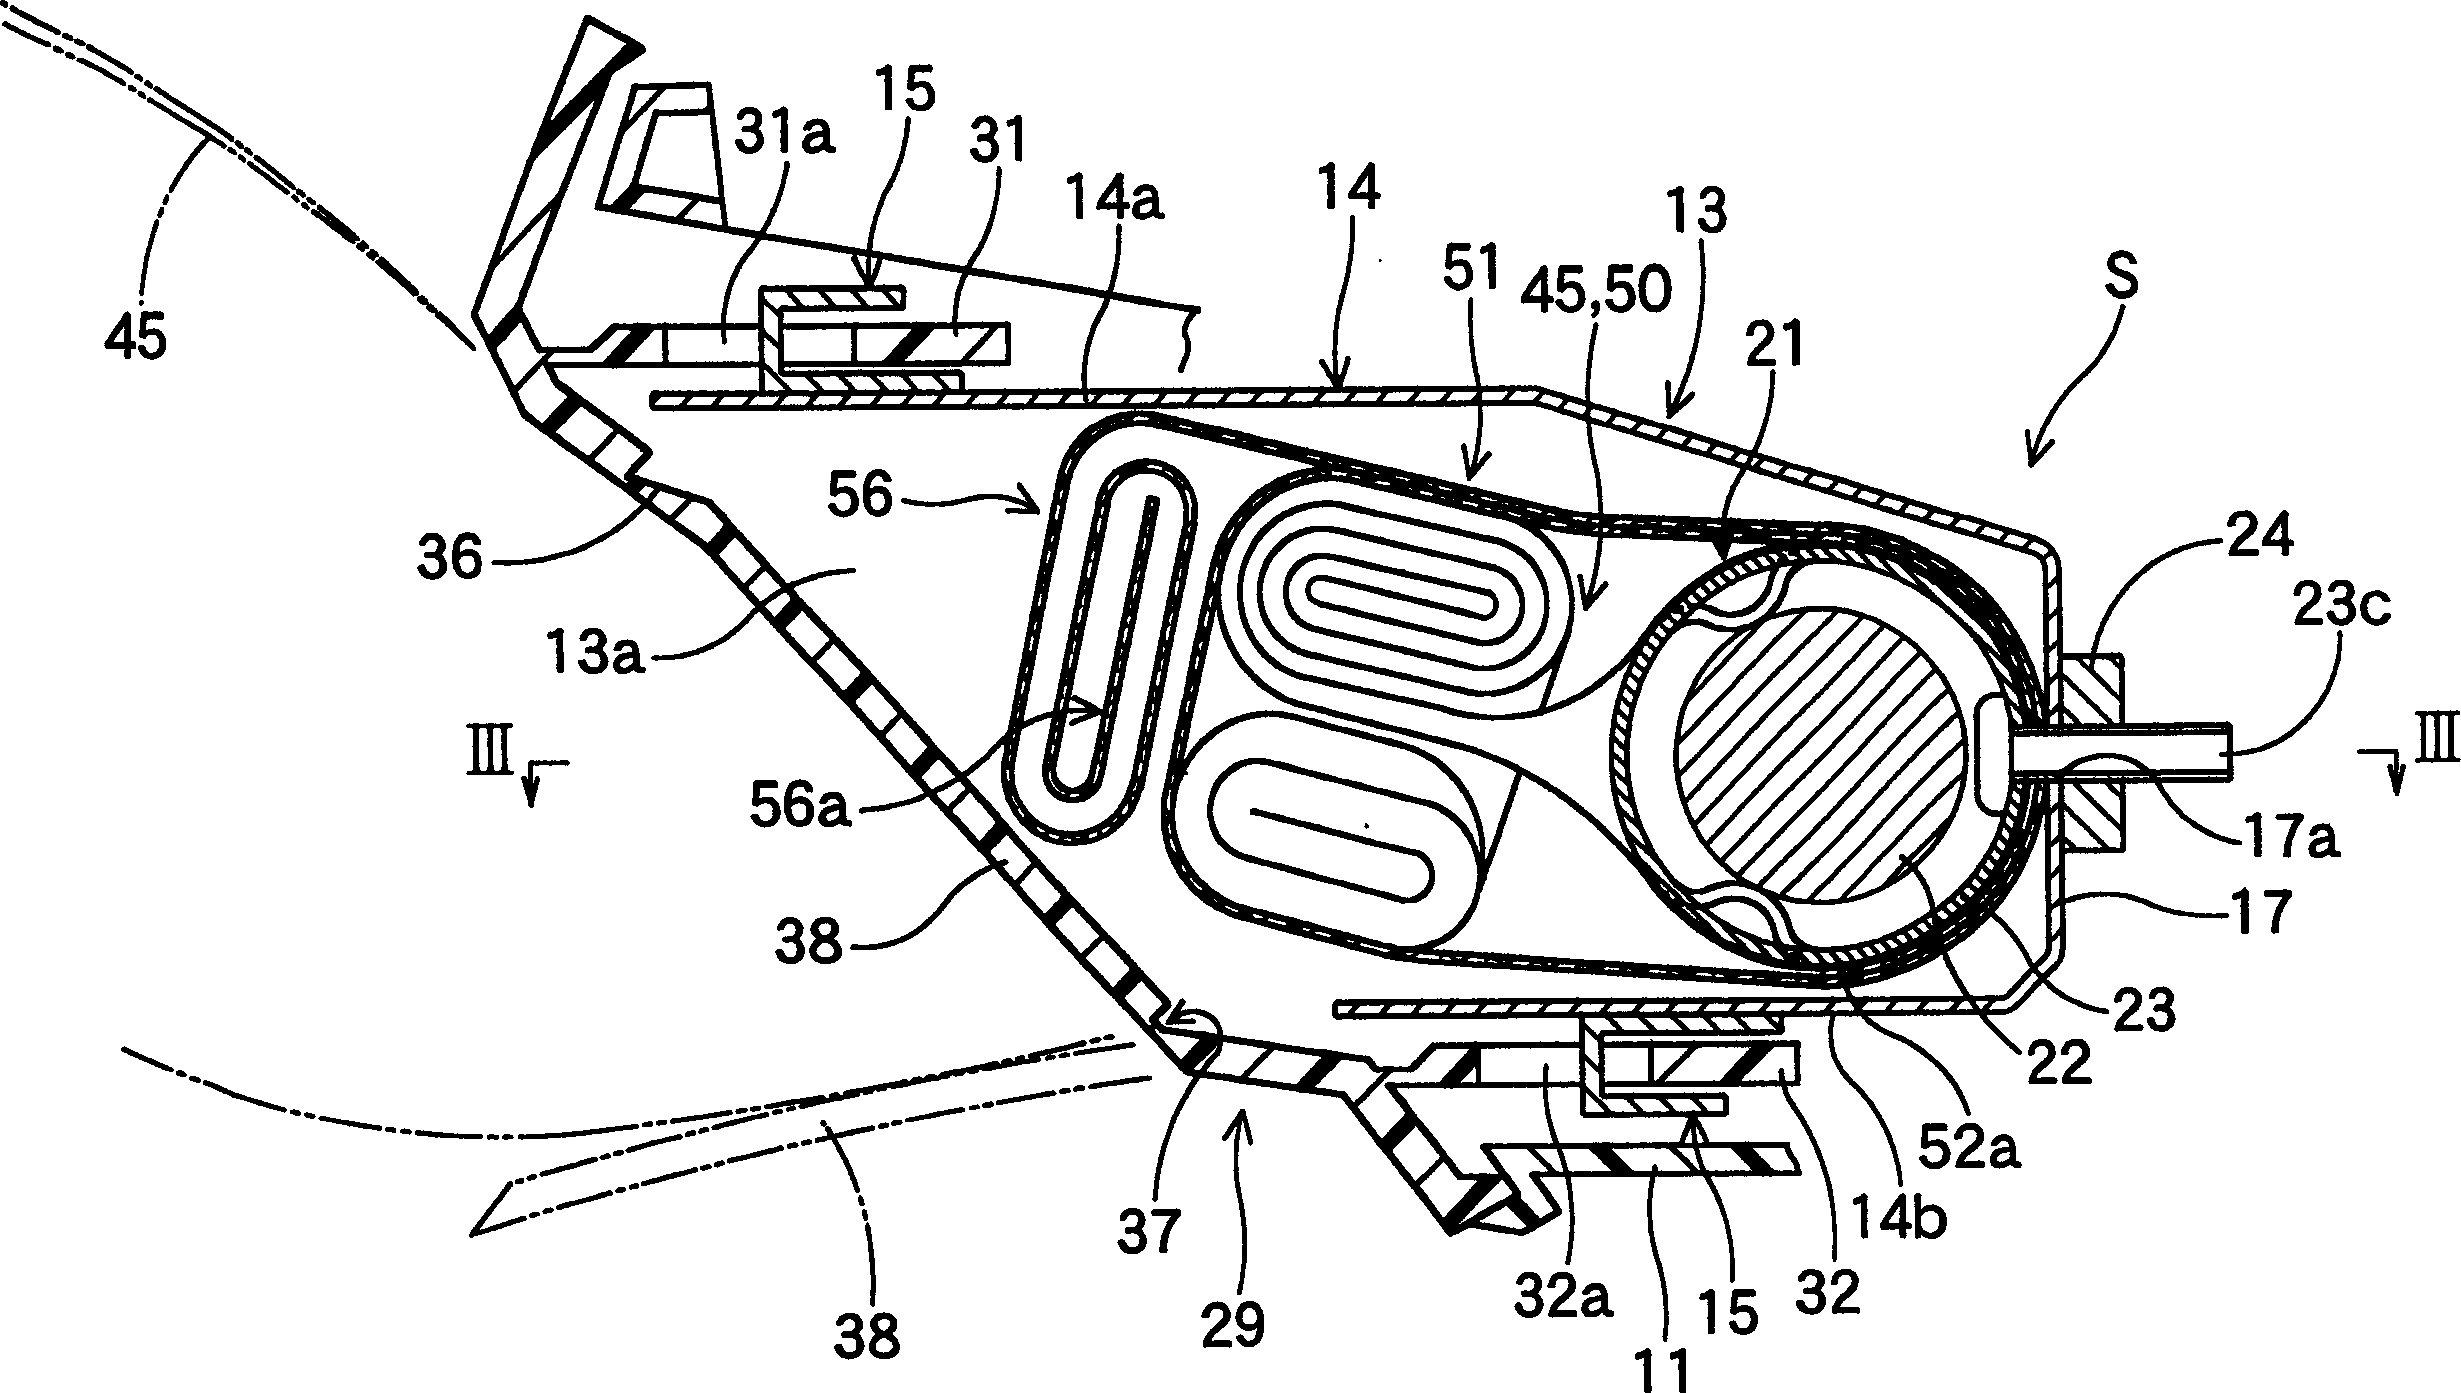 Air bag device for knee protection